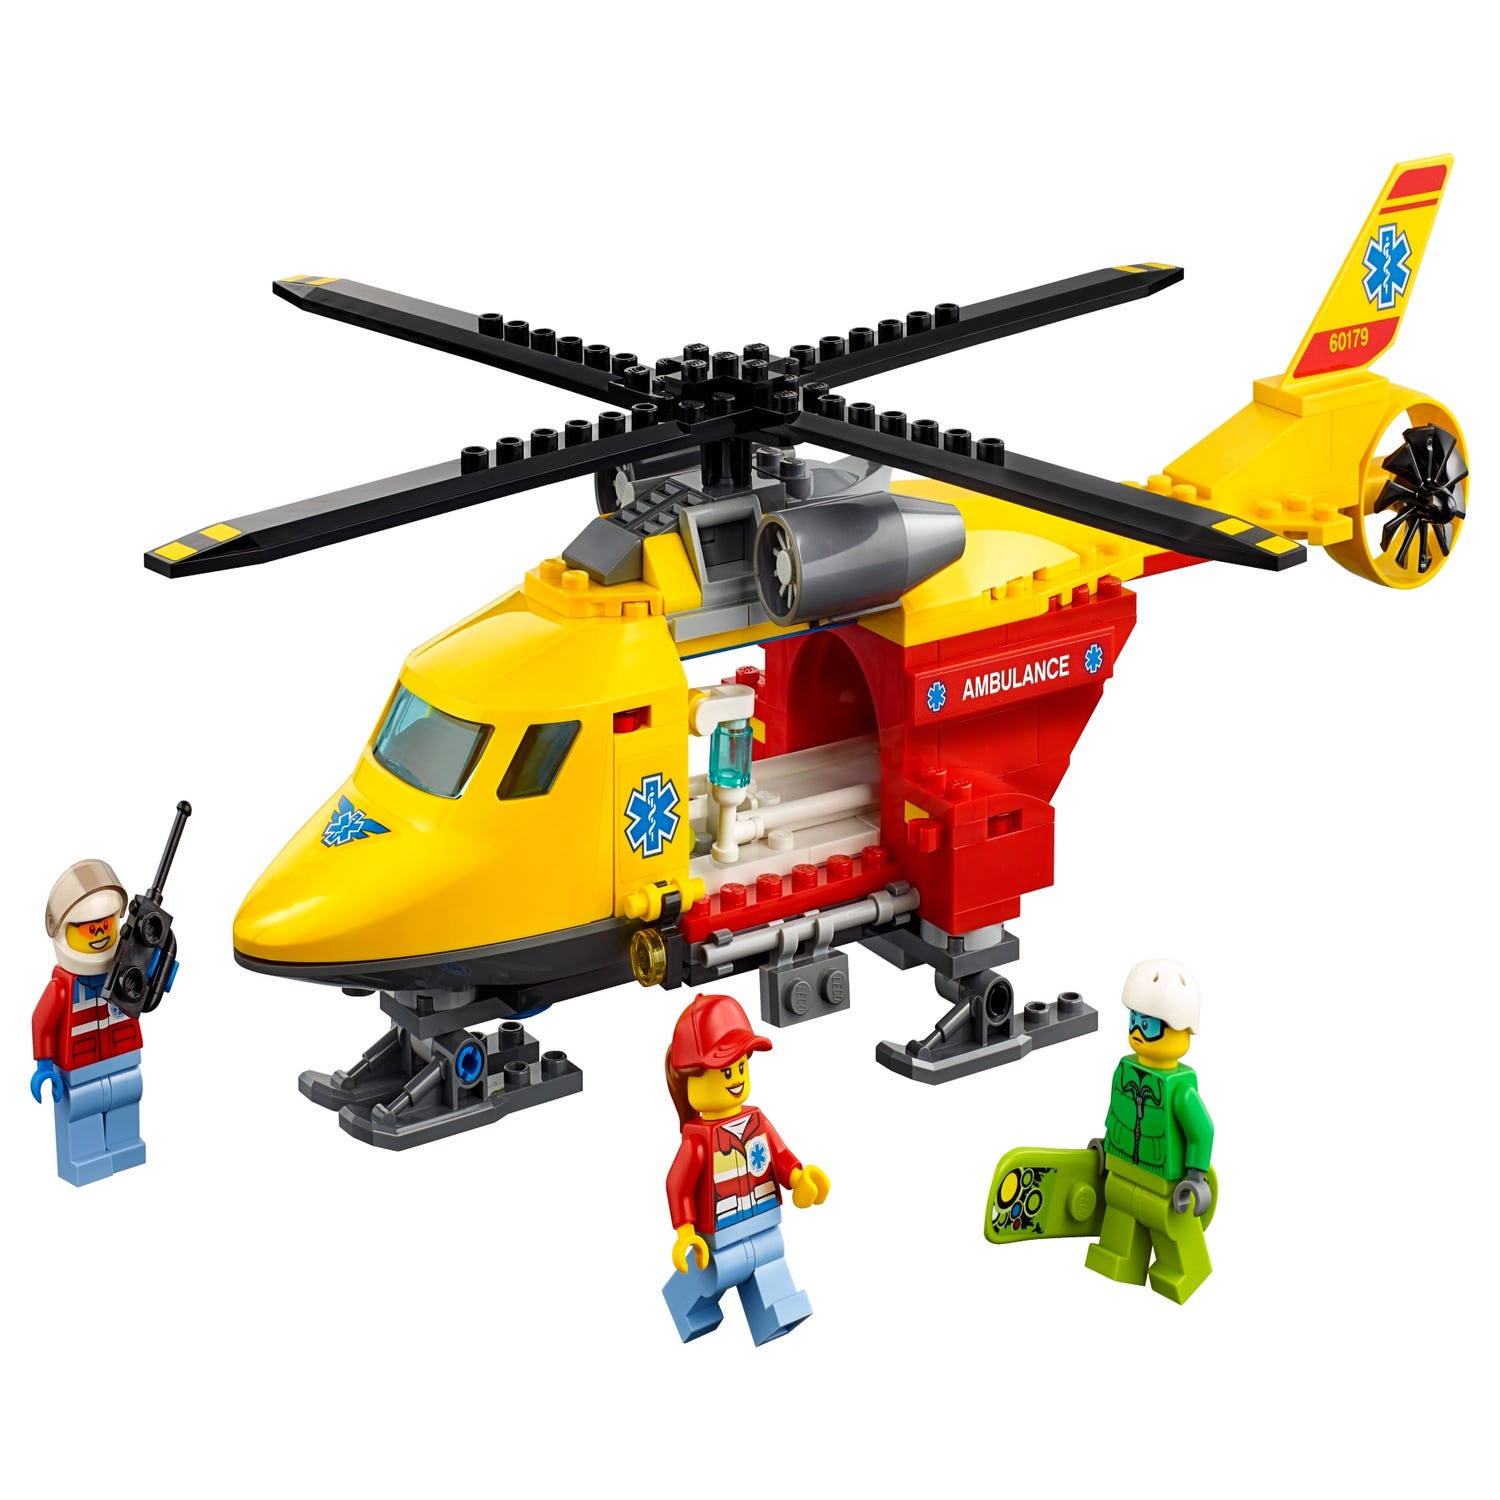 Ambulance Helicopter 60179 | City | Buy online at the